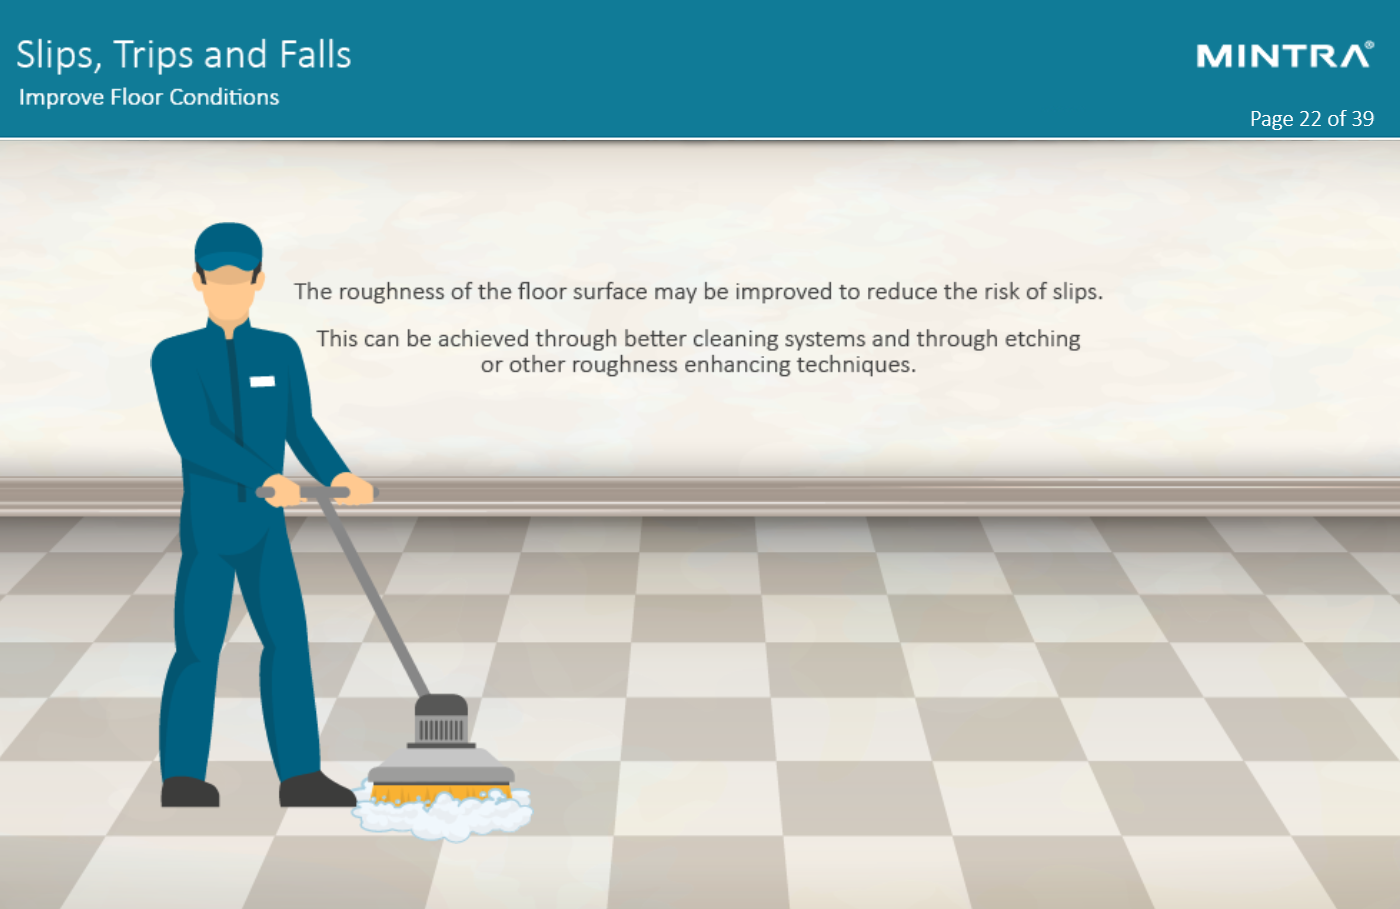 Slips, Trips and Falls Training 4